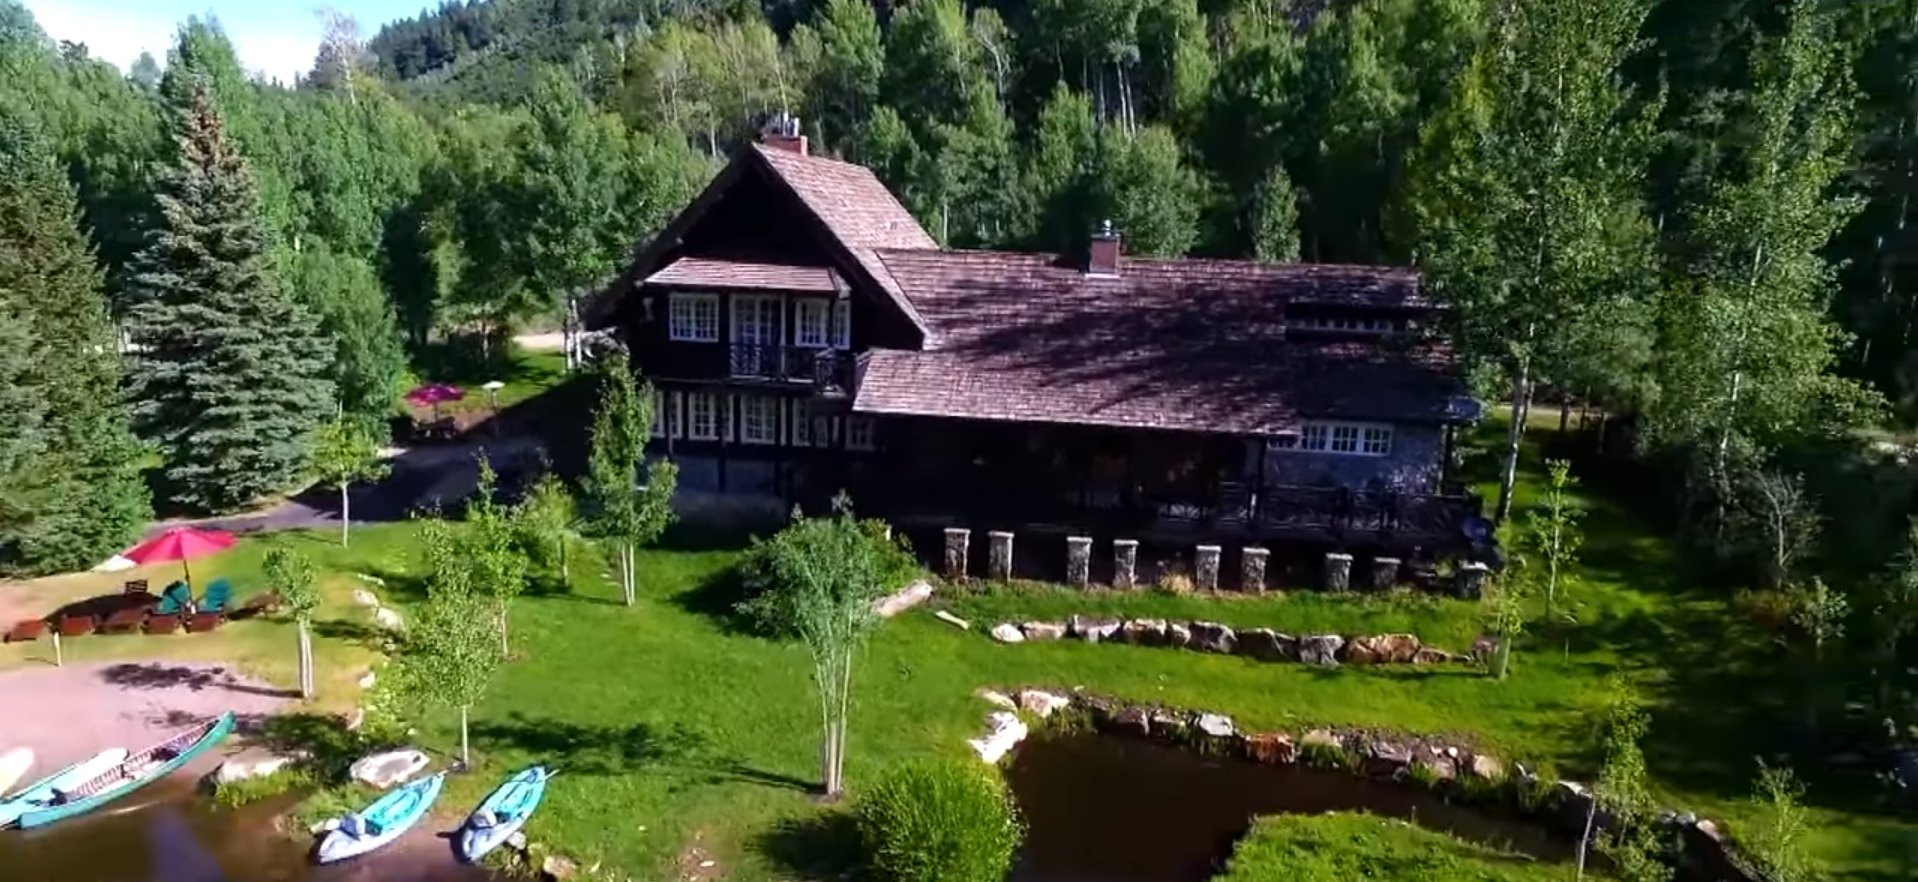 Kevin Costners Anwesen in Aspen, Colorado. | Quelle: Youtube/CNBCMakeIt